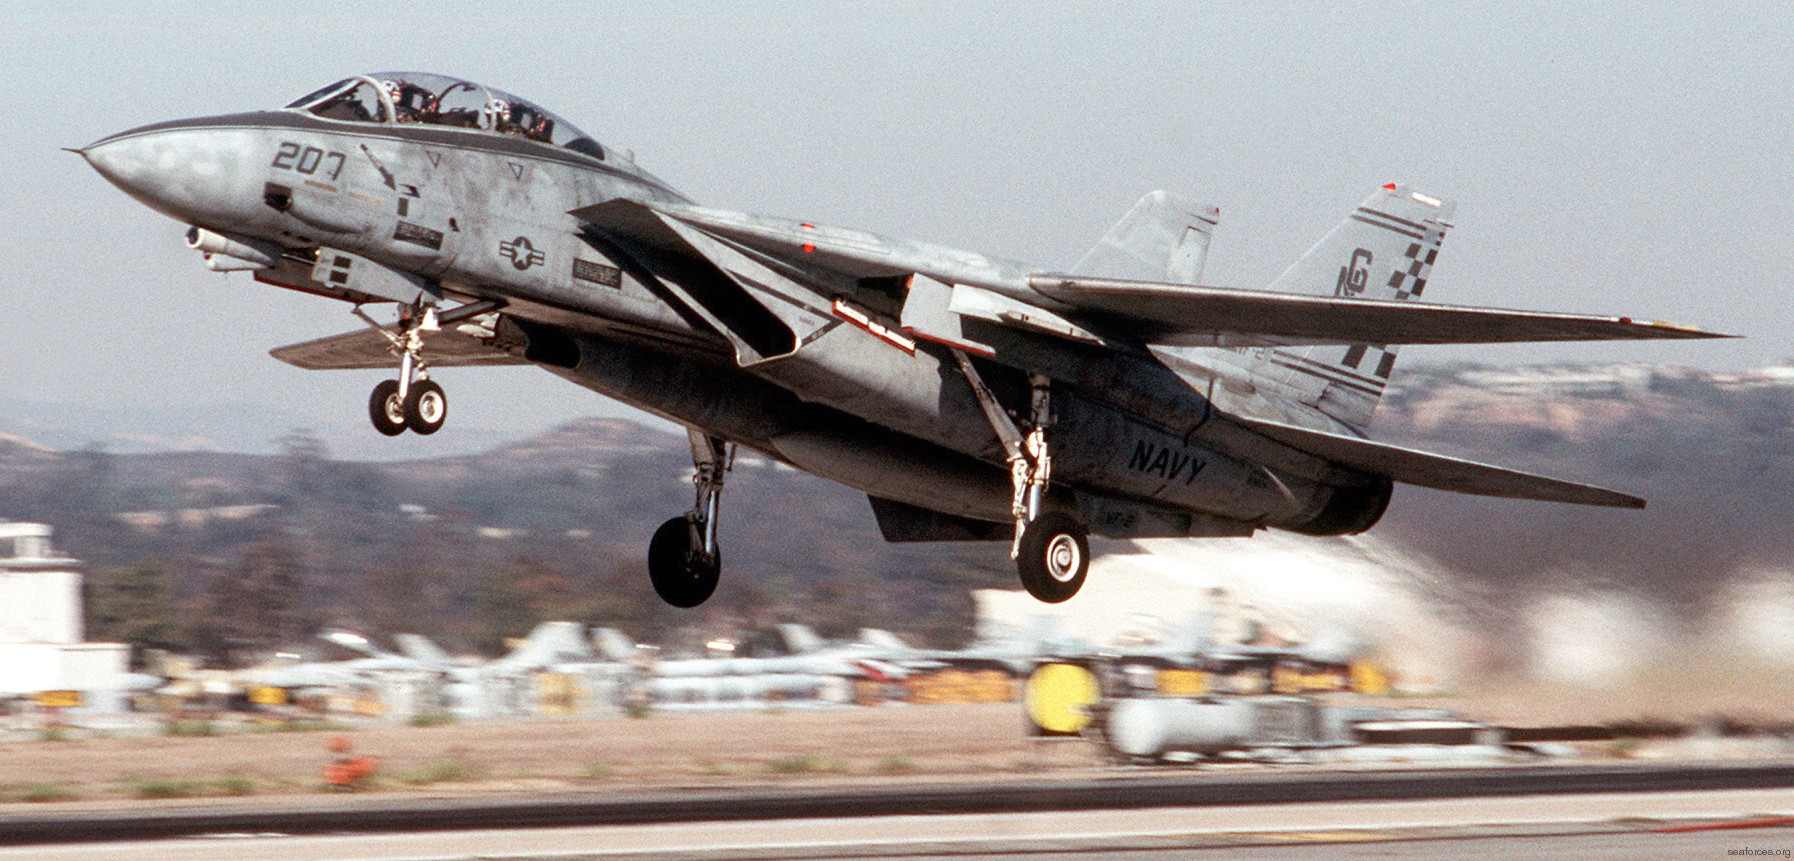 vf-211 fighting checkmates fighter squadron f-14a tomcat us navy carrier air wing cvw-9 84 nas miramar